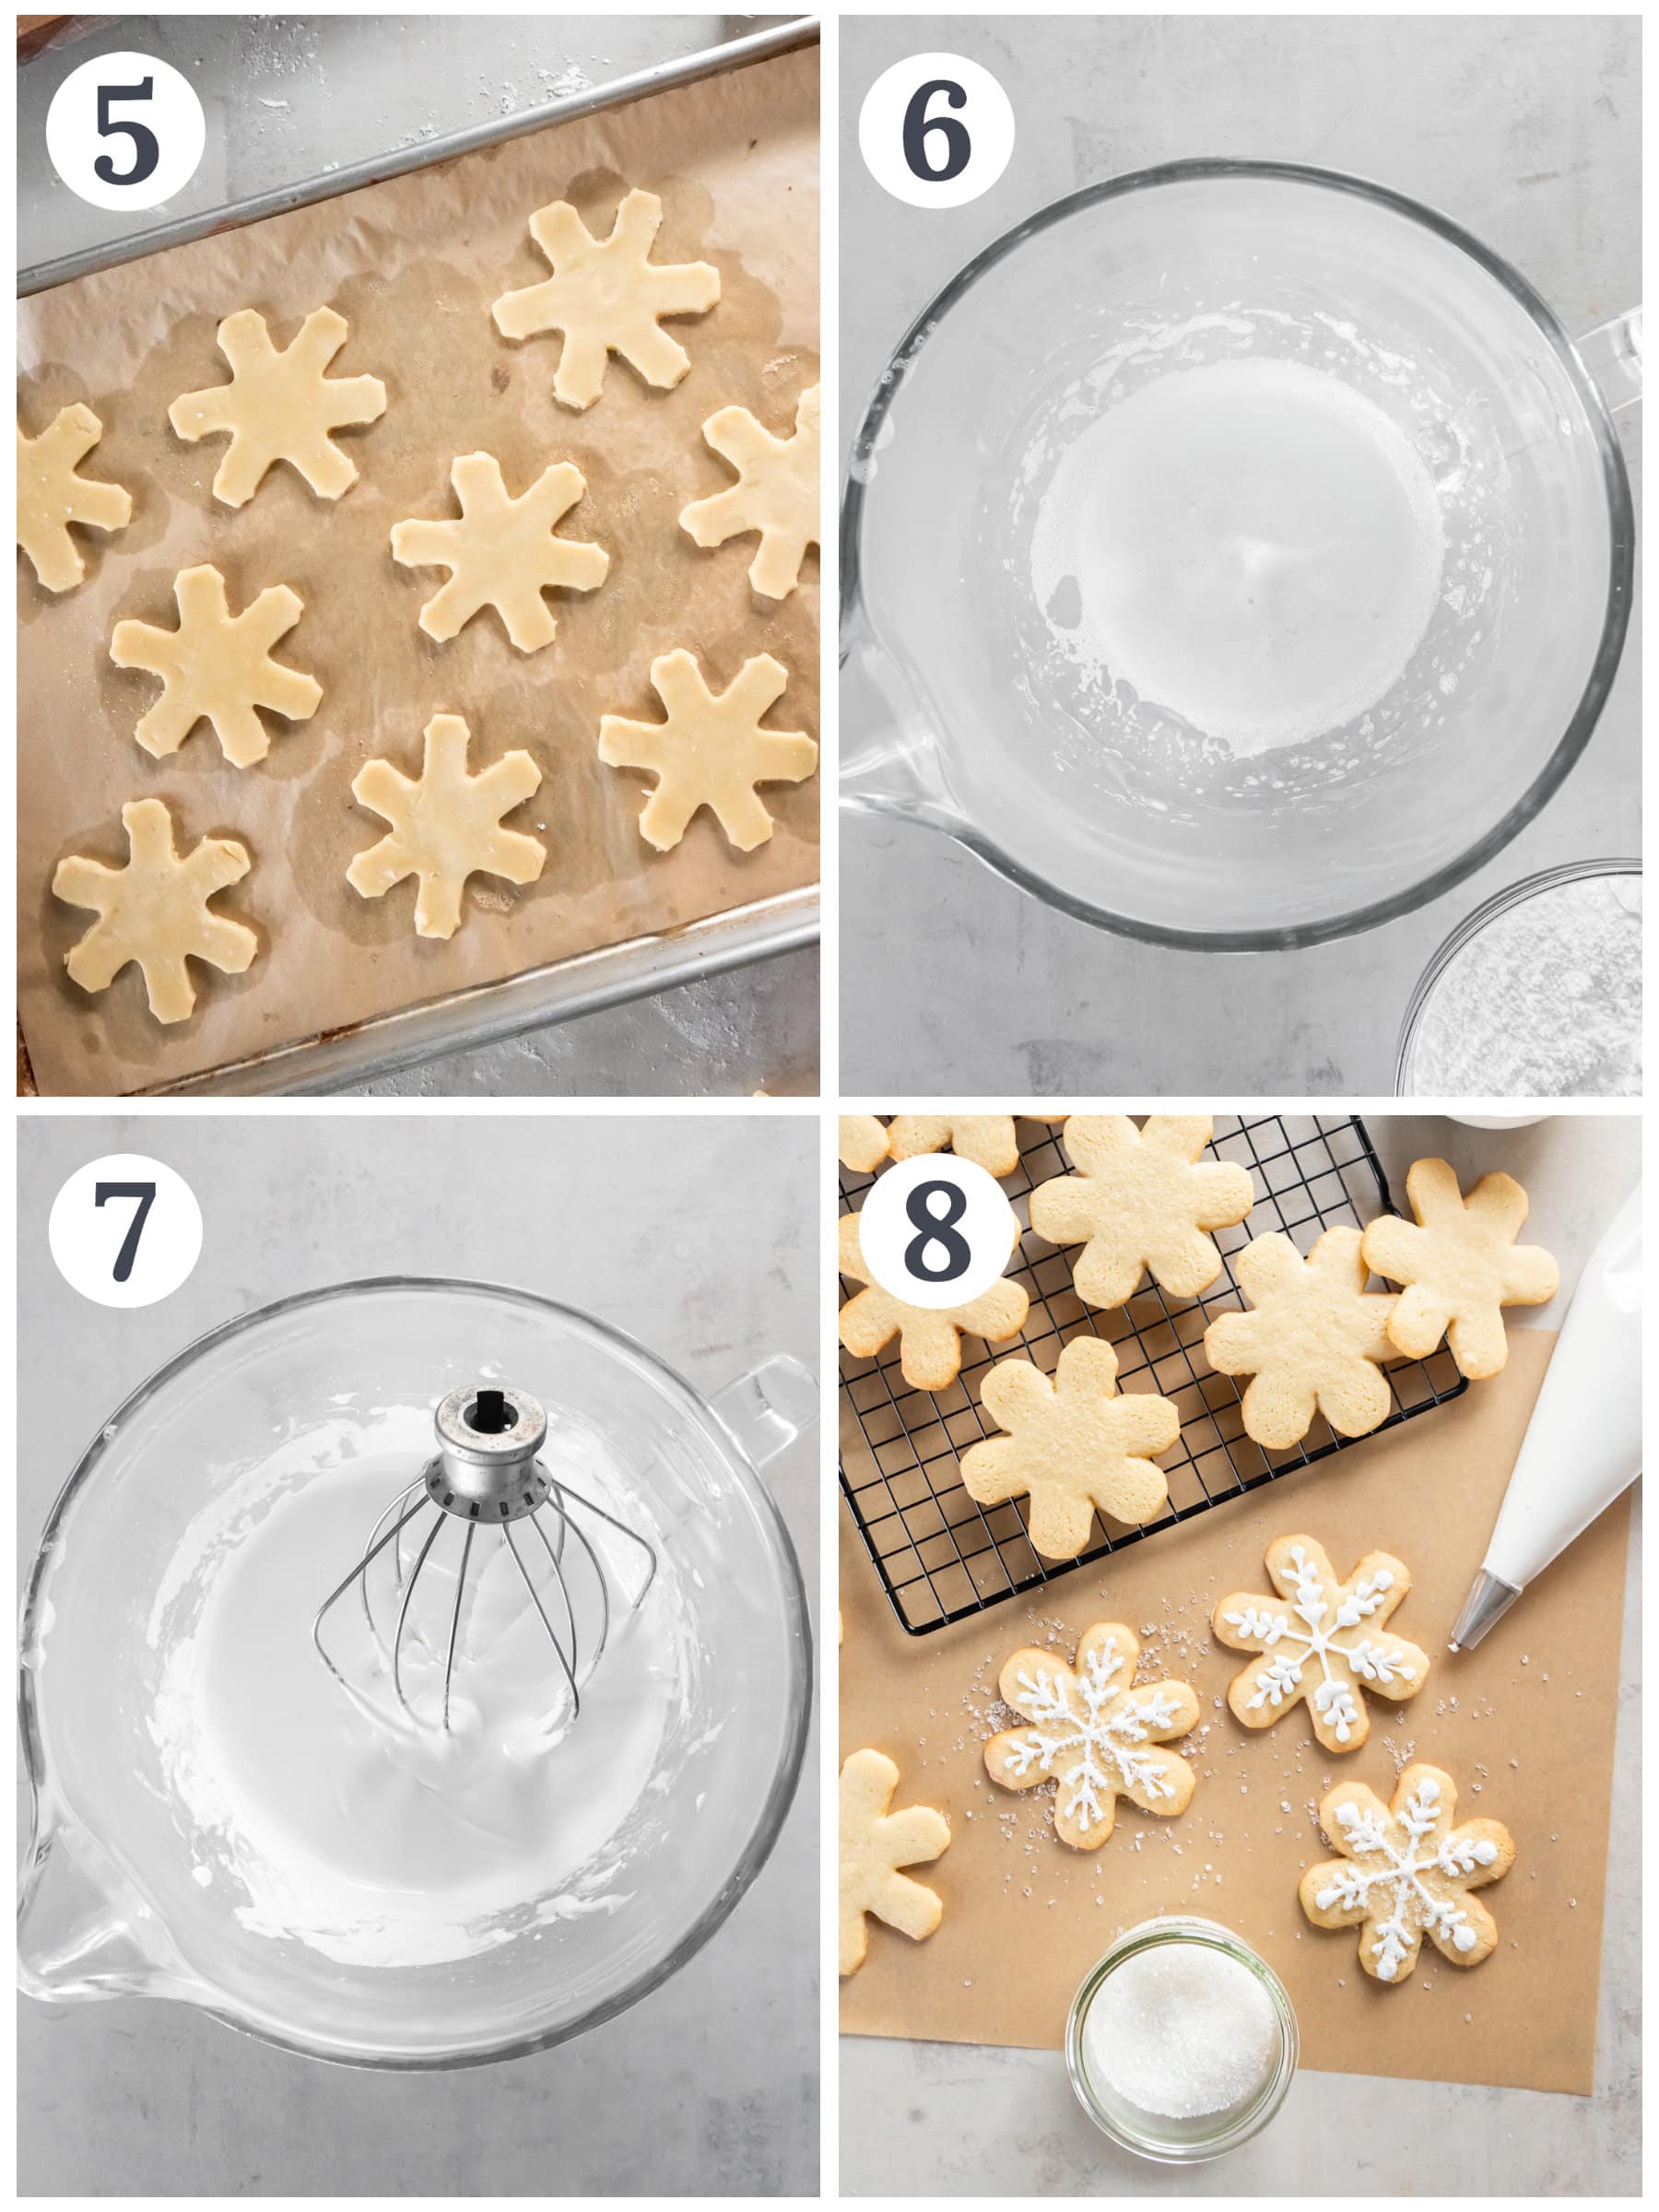 photo collage demonstrating how to make royal icing to decorate snowflake sugar cookies.